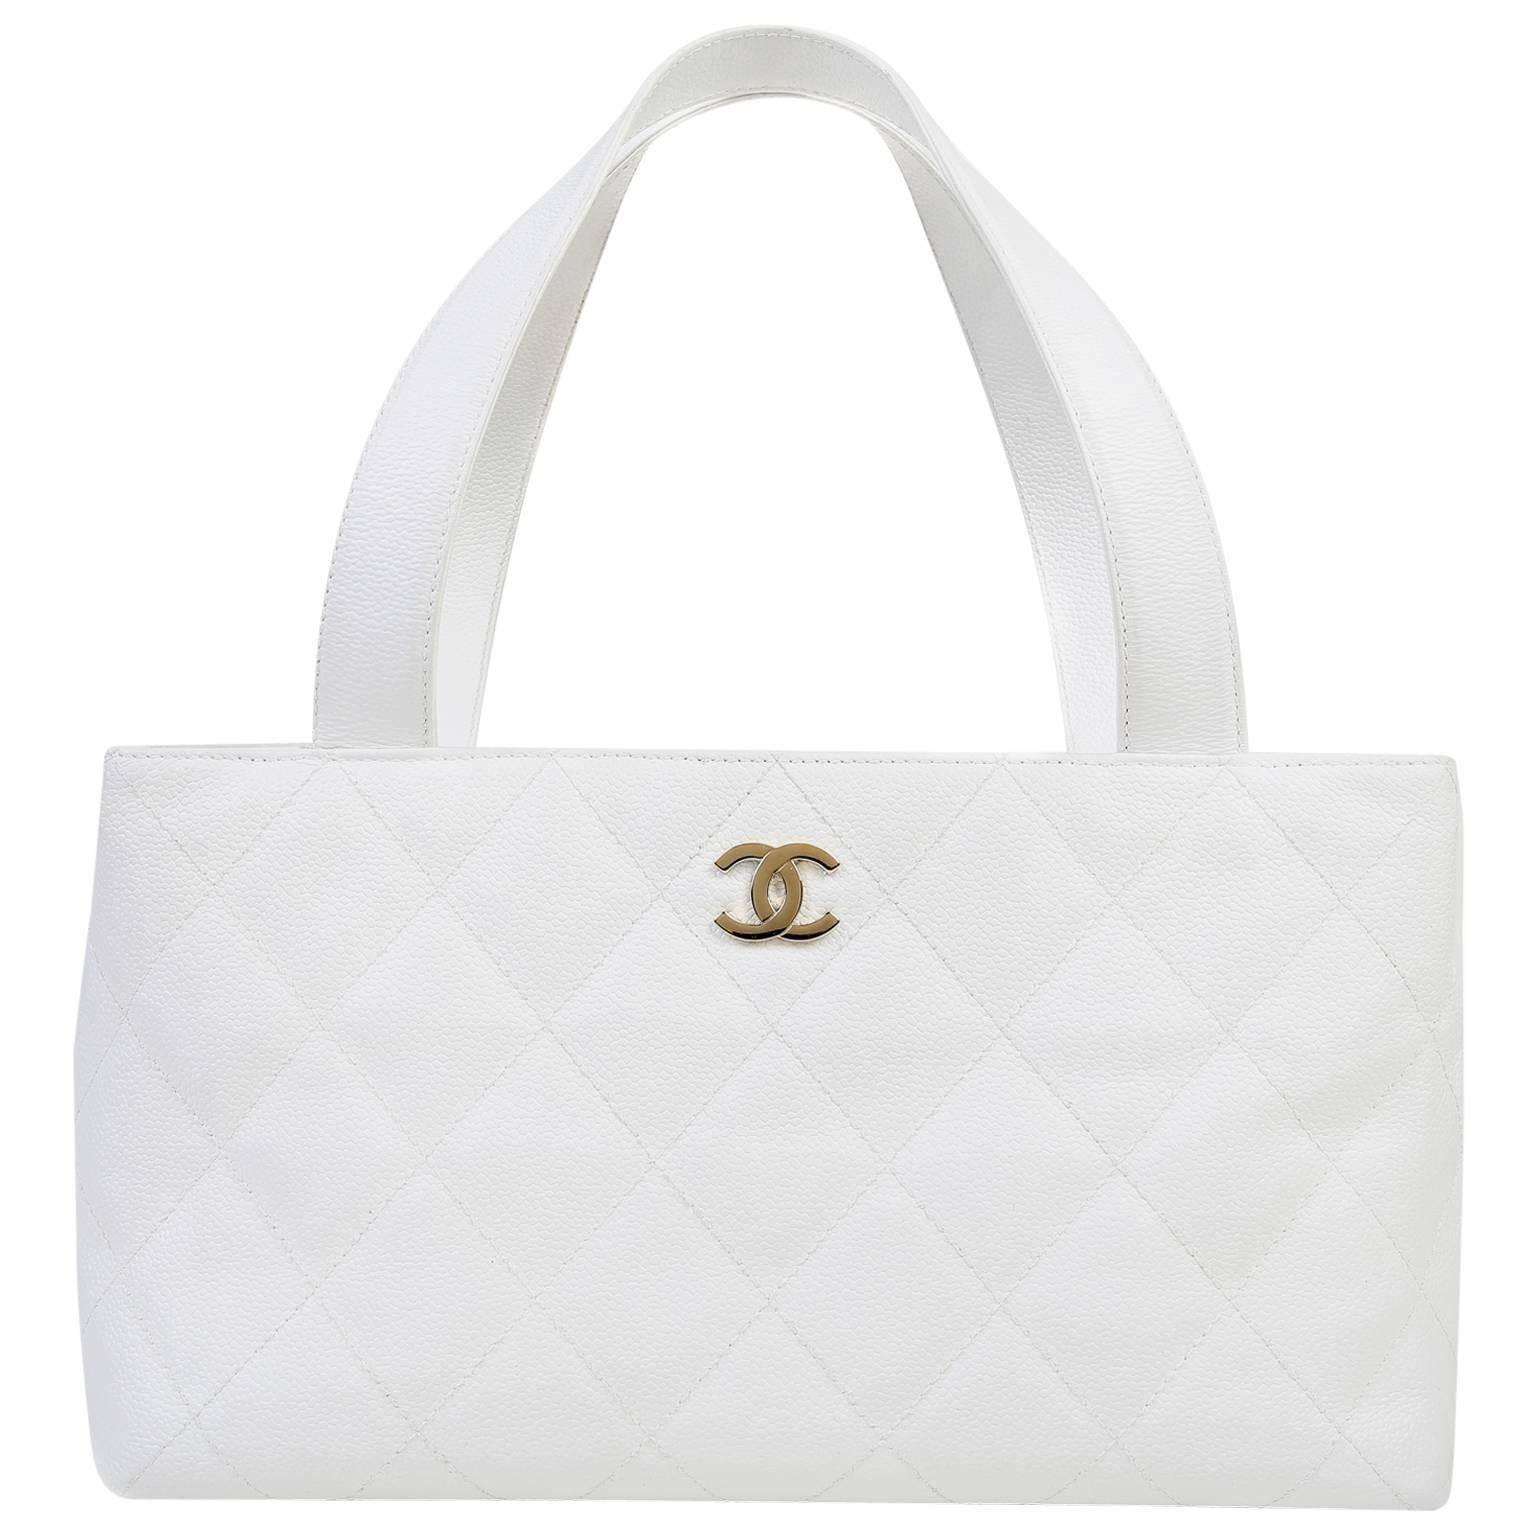 Chanel White Caviar Leather Tote Bag For Sale